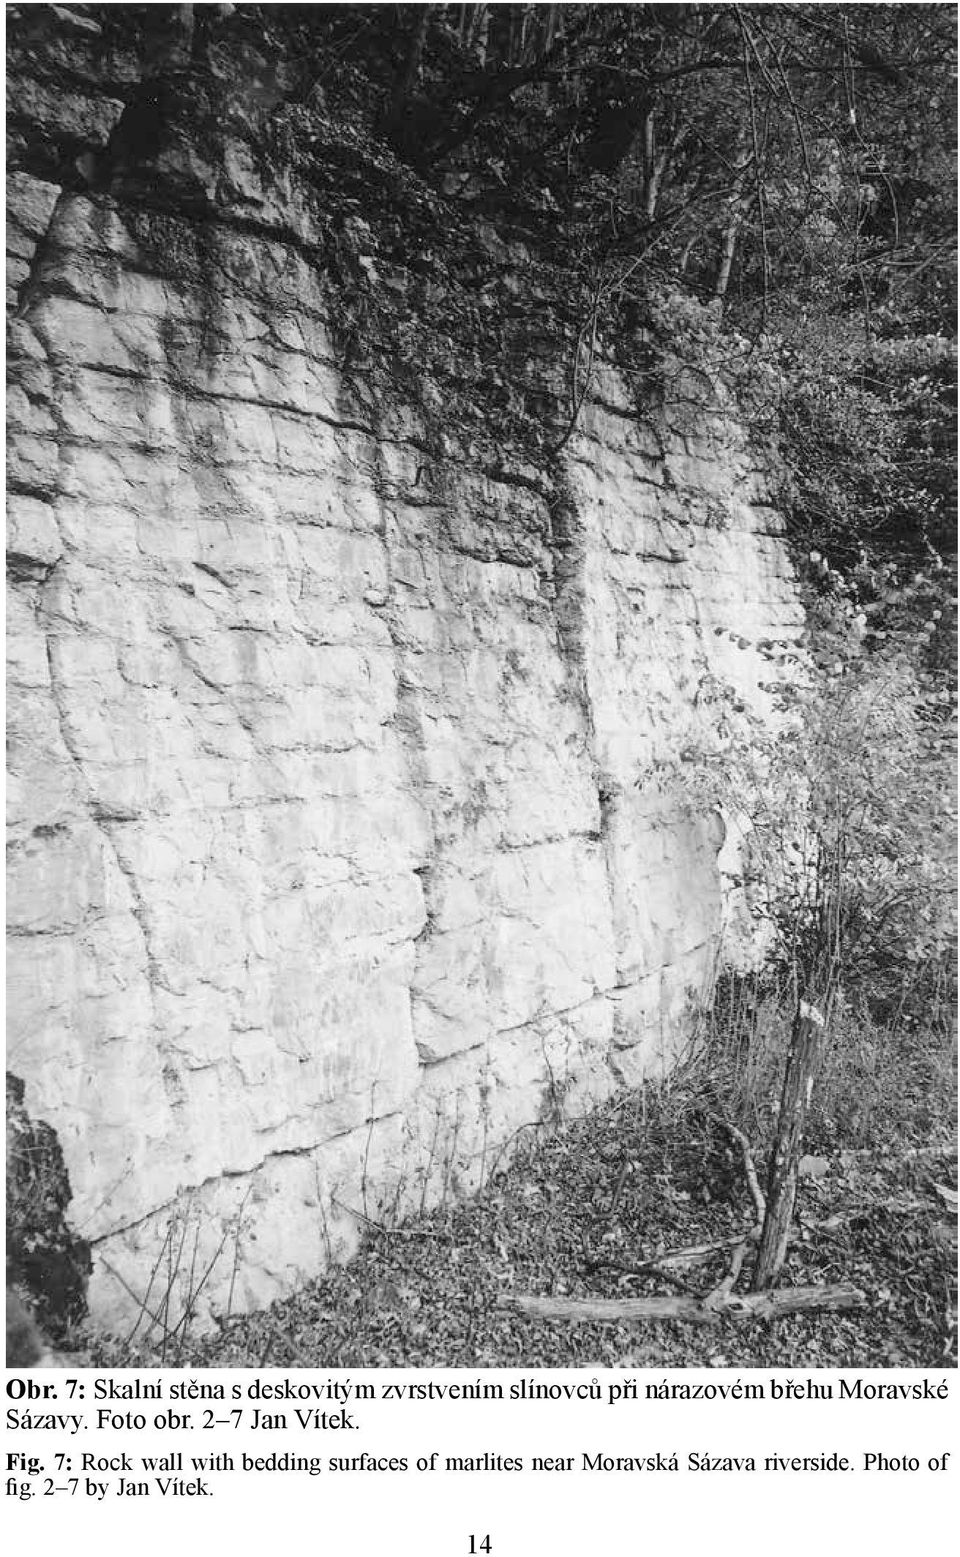 Fig. 7: Rock wall with bedding surfaces of marlites near